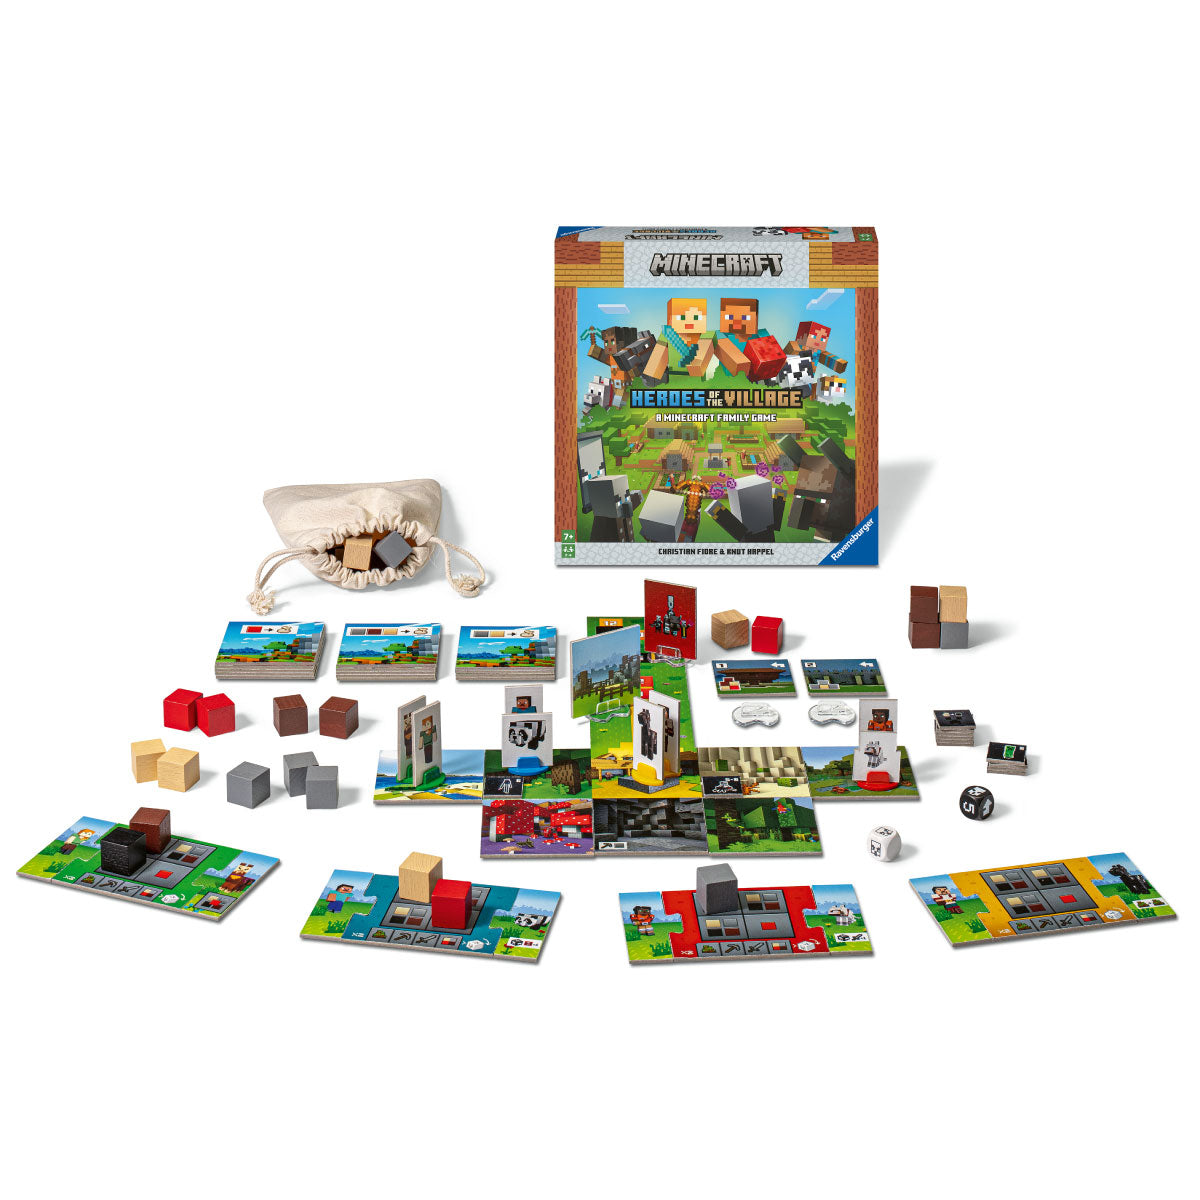 Ravensburger Minecraft Heroes of the Village Game